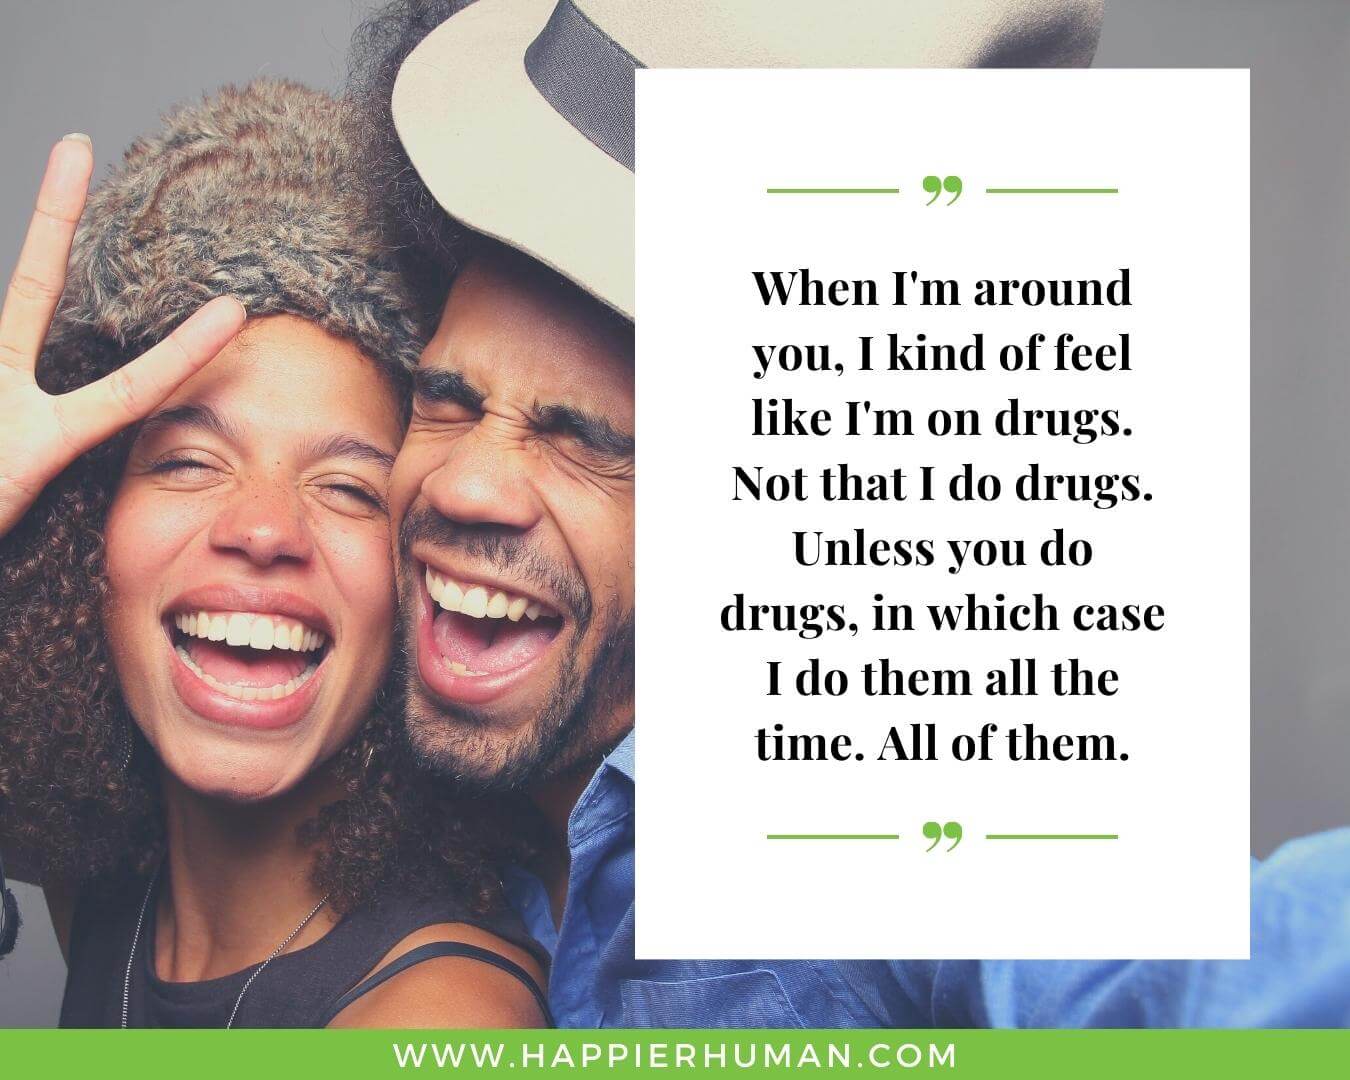 Unconditional Love Quotes for Her - “When I'm around you, I kind of feel like I'm on drugs. Not that I do drugs. Unless you do drugs, in which case I do them all the time. All of them.”